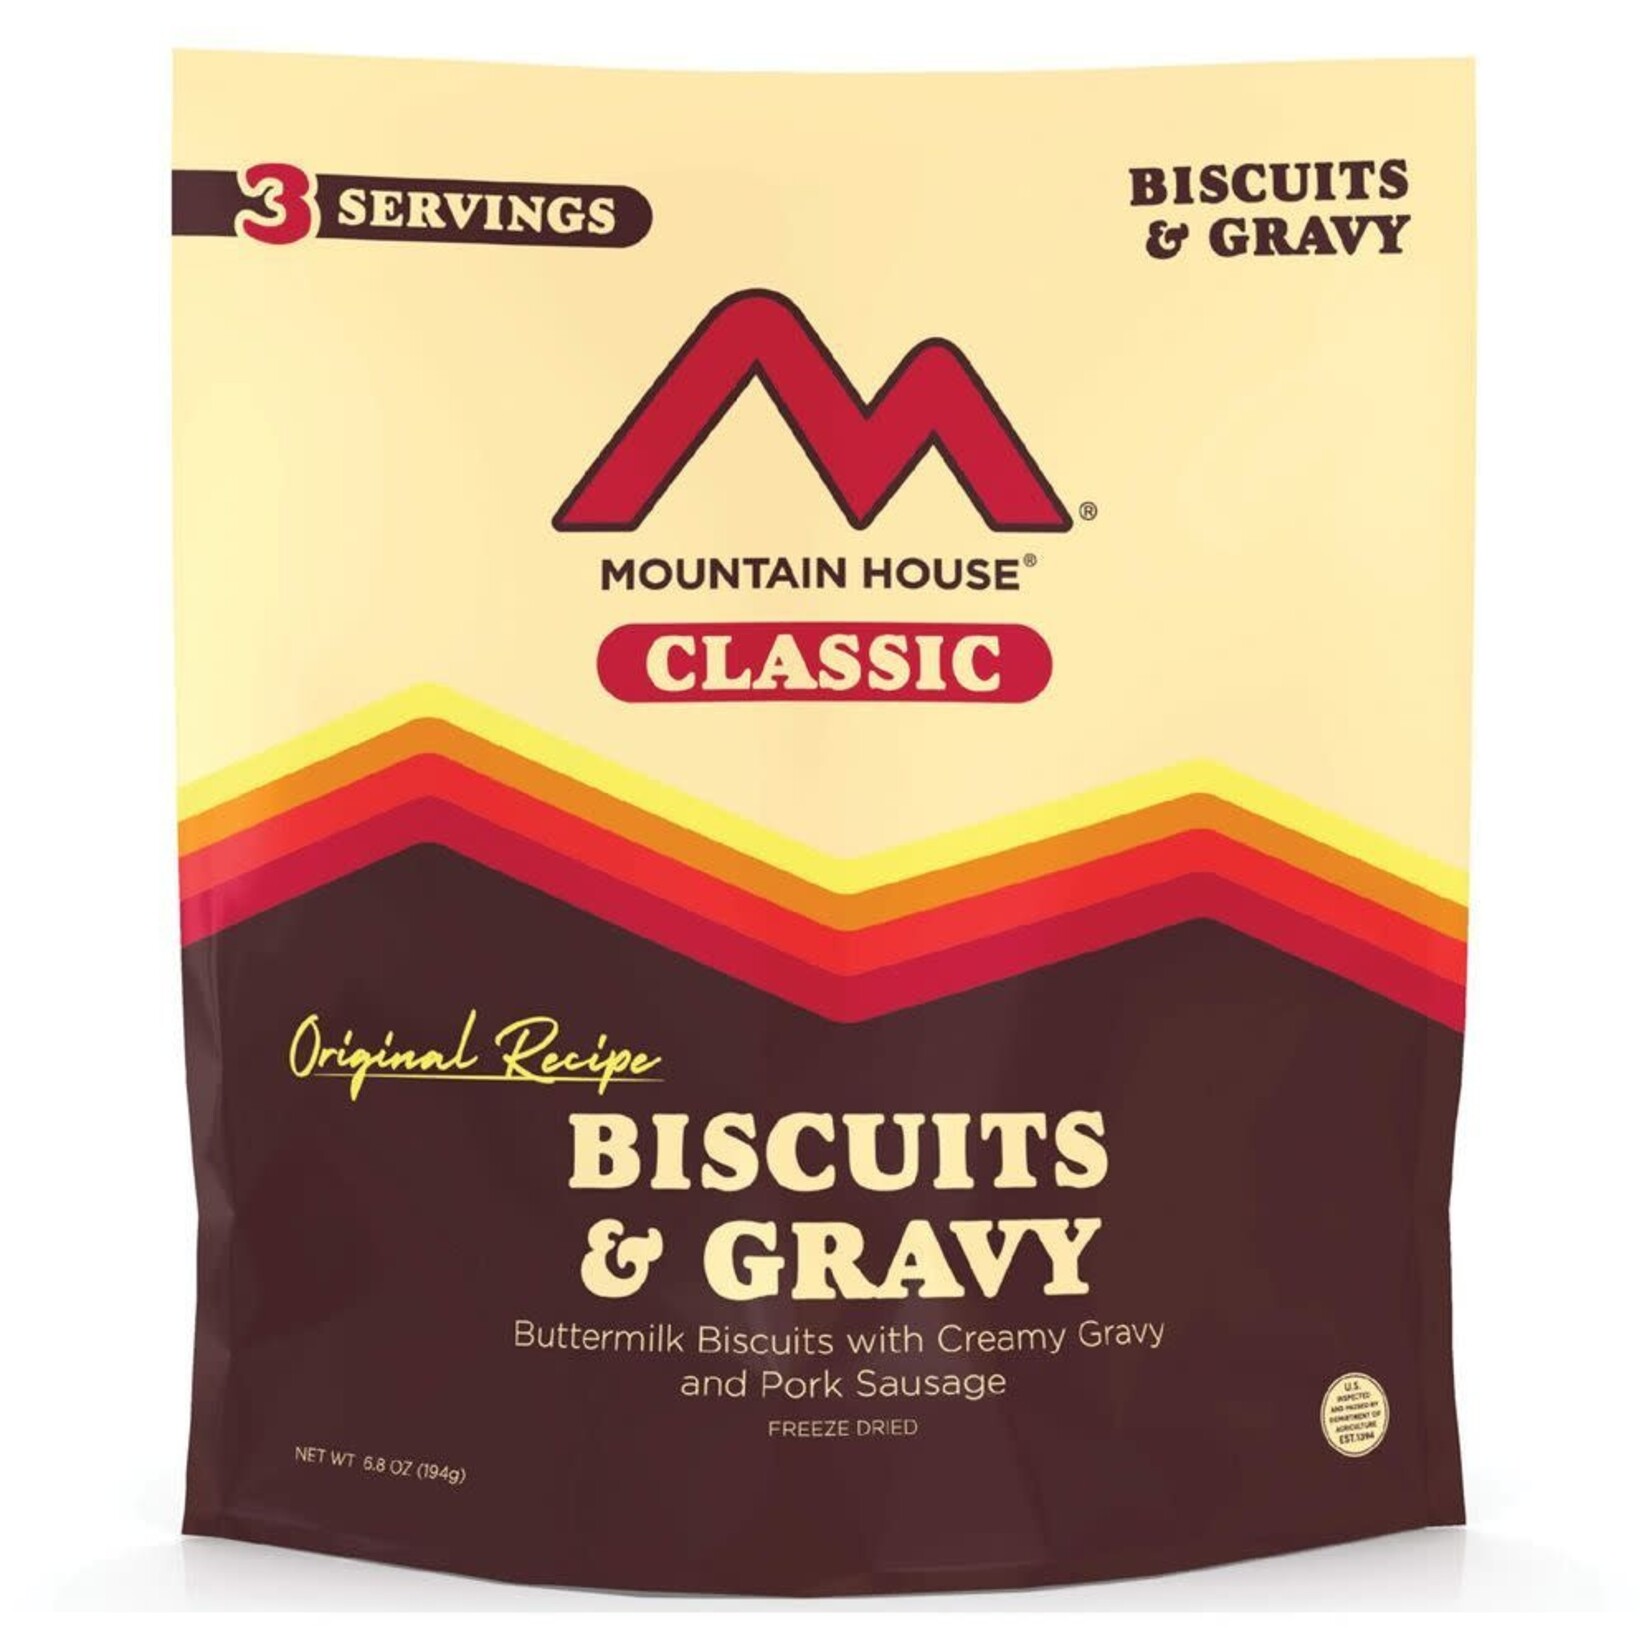 MOUNTAIN HOUSE CLASSIC BISCUITS AND GRAVY